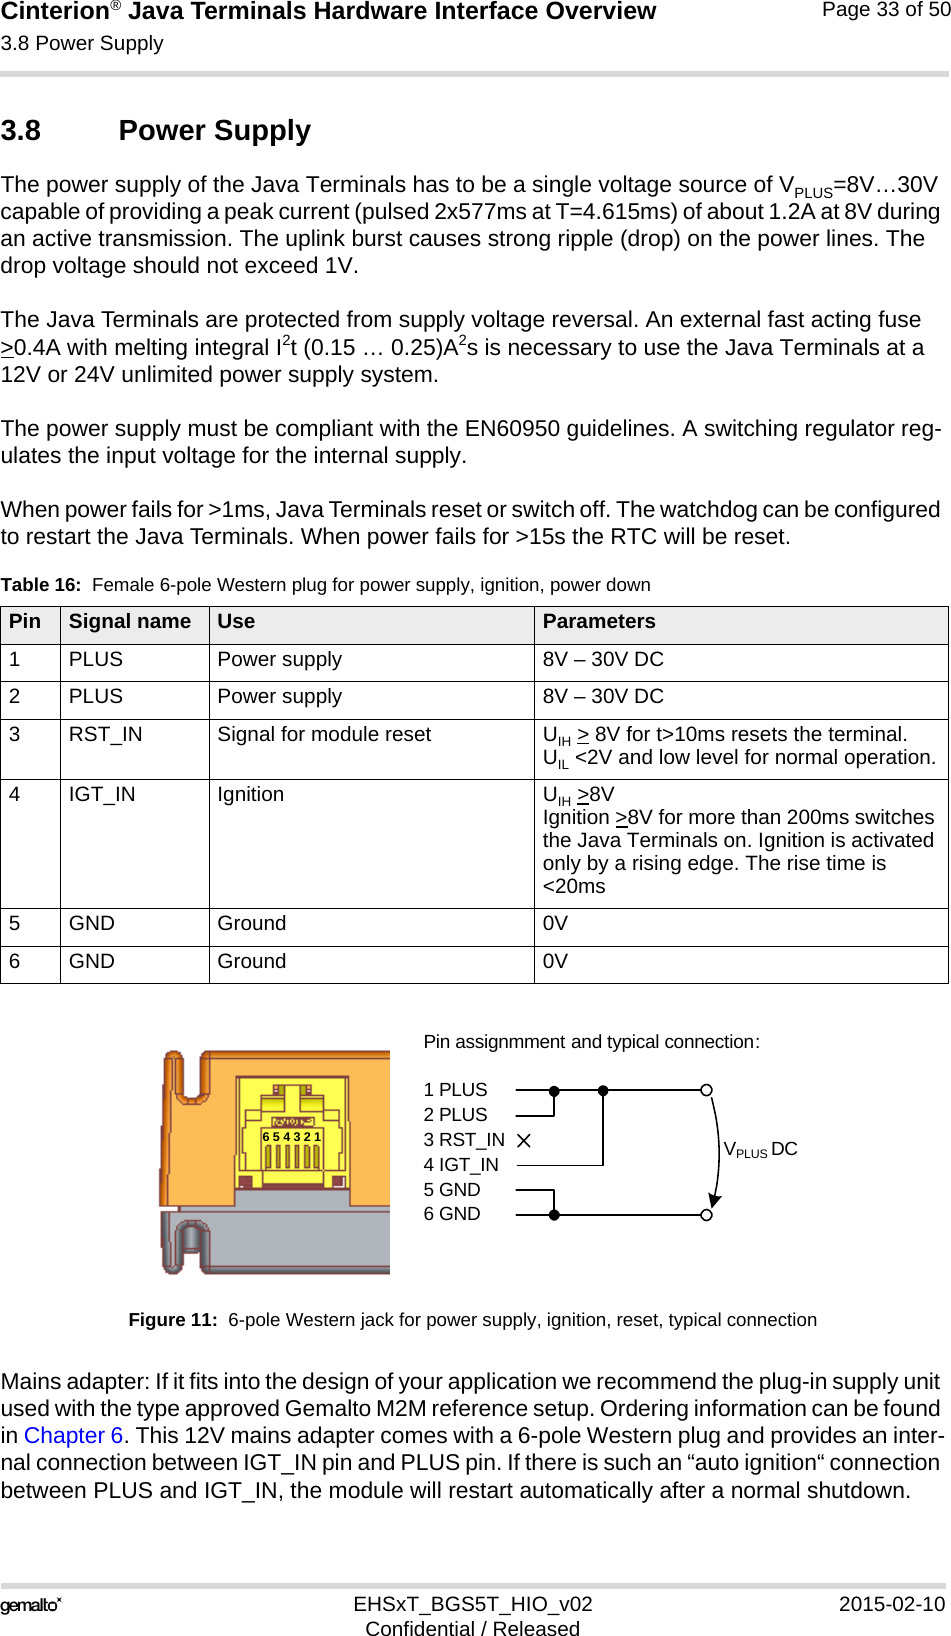 Cinterion® Java Terminals Hardware Interface Overview3.8 Power Supply39EHSxT_BGS5T_HIO_v02 2015-02-10Confidential / ReleasedPage 33 of 503.8 Power SupplyThe power supply of the Java Terminals has to be a single voltage source of VPLUS=8V…30V capable of providing a peak current (pulsed 2x577ms at T=4.615ms) of about 1.2A at 8V during an active transmission. The uplink burst causes strong ripple (drop) on the power lines. The drop voltage should not exceed 1V. The Java Terminals are protected from supply voltage reversal. An external fast acting fuse &gt;0.4A with melting integral I2t (0.15 … 0.25)A2s is necessary to use the Java Terminals at a 12V or 24V unlimited power supply system.The power supply must be compliant with the EN60950 guidelines. A switching regulator reg-ulates the input voltage for the internal supply.When power fails for &gt;1ms, Java Terminals reset or switch off. The watchdog can be configured to restart the Java Terminals. When power fails for &gt;15s the RTC will be reset.Figure 11:  6-pole Western jack for power supply, ignition, reset, typical connectionMains adapter: If it fits into the design of your application we recommend the plug-in supply unit used with the type approved Gemalto M2M reference setup. Ordering information can be found in Chapter 6. This 12V mains adapter comes with a 6-pole Western plug and provides an inter-nal connection between IGT_IN pin and PLUS pin. If there is such an “auto ignition“ connection between PLUS and IGT_IN, the module will restart automatically after a normal shutdown.Table 16:  Female 6-pole Western plug for power supply, ignition, power downPin Signal name Use Parameters1 PLUS Power supply 8V – 30V DC2 PLUS Power supply 8V – 30V DC3 RST_IN Signal for module reset UIH &gt; 8V for t&gt;10ms resets the terminal.UIL &lt;2V and low level for normal operation.4 IGT_IN Ignition UIH &gt;8VIgnition &gt;8V for more than 200ms switches the Java Terminals on. Ignition is activated only by a rising edge. The rise time is &lt;20ms5 GND Ground 0V6 GND Ground 0VPin assignmment and typical connection:1 PLUS2 PLUS3 RST_IN4 IGT_IN5 GND6 GNDVPLUS DC6 5 4 3 2 1